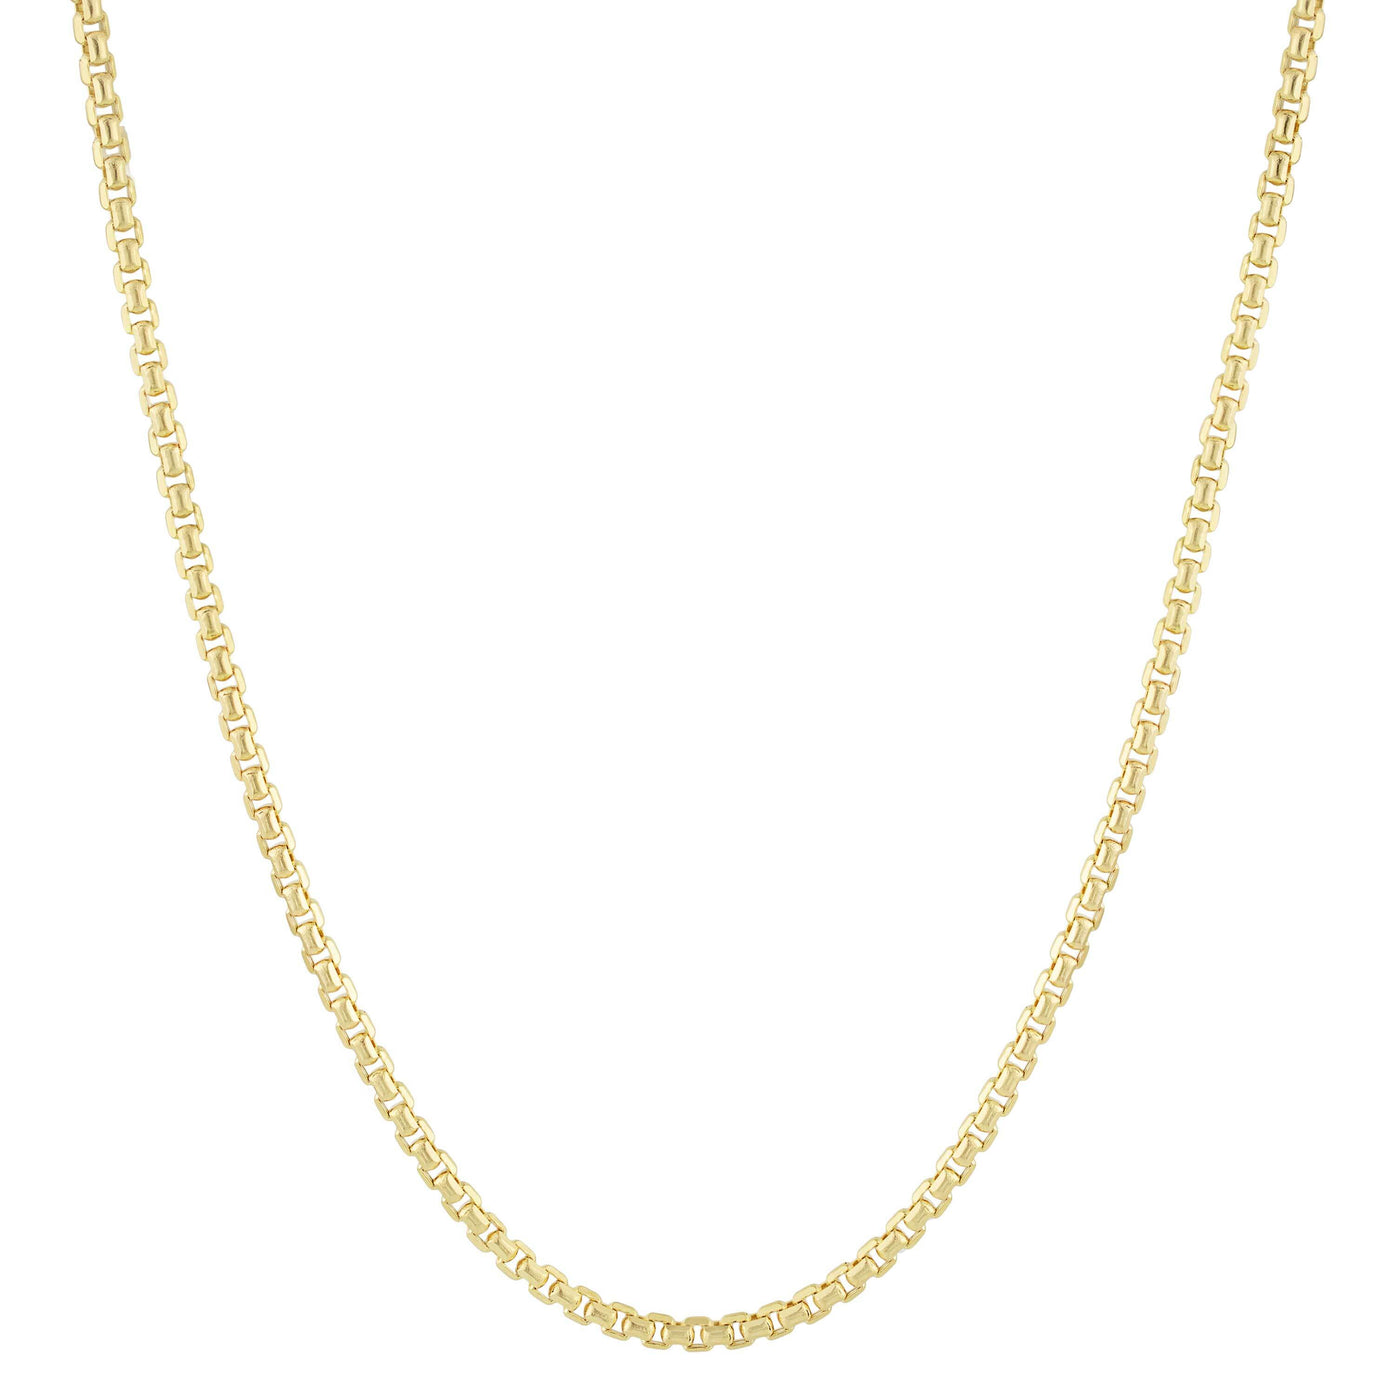 Women's Round Box Link Chain Necklace 14K Gold - Hollow